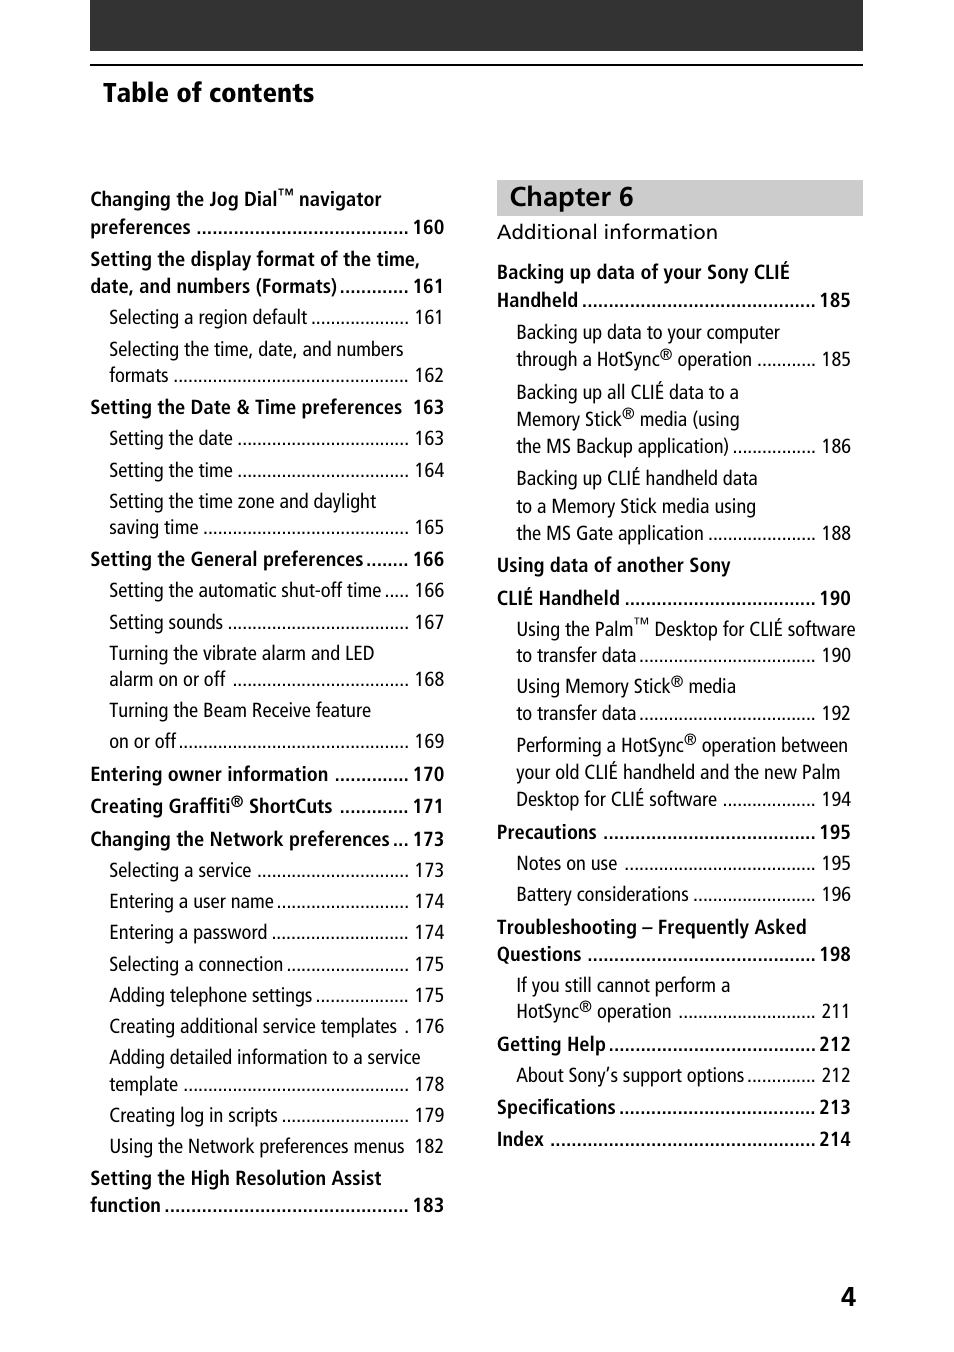 4table of contents, Chapter 6 | Sony PEG-T415G User Manual | Page 4 / 220